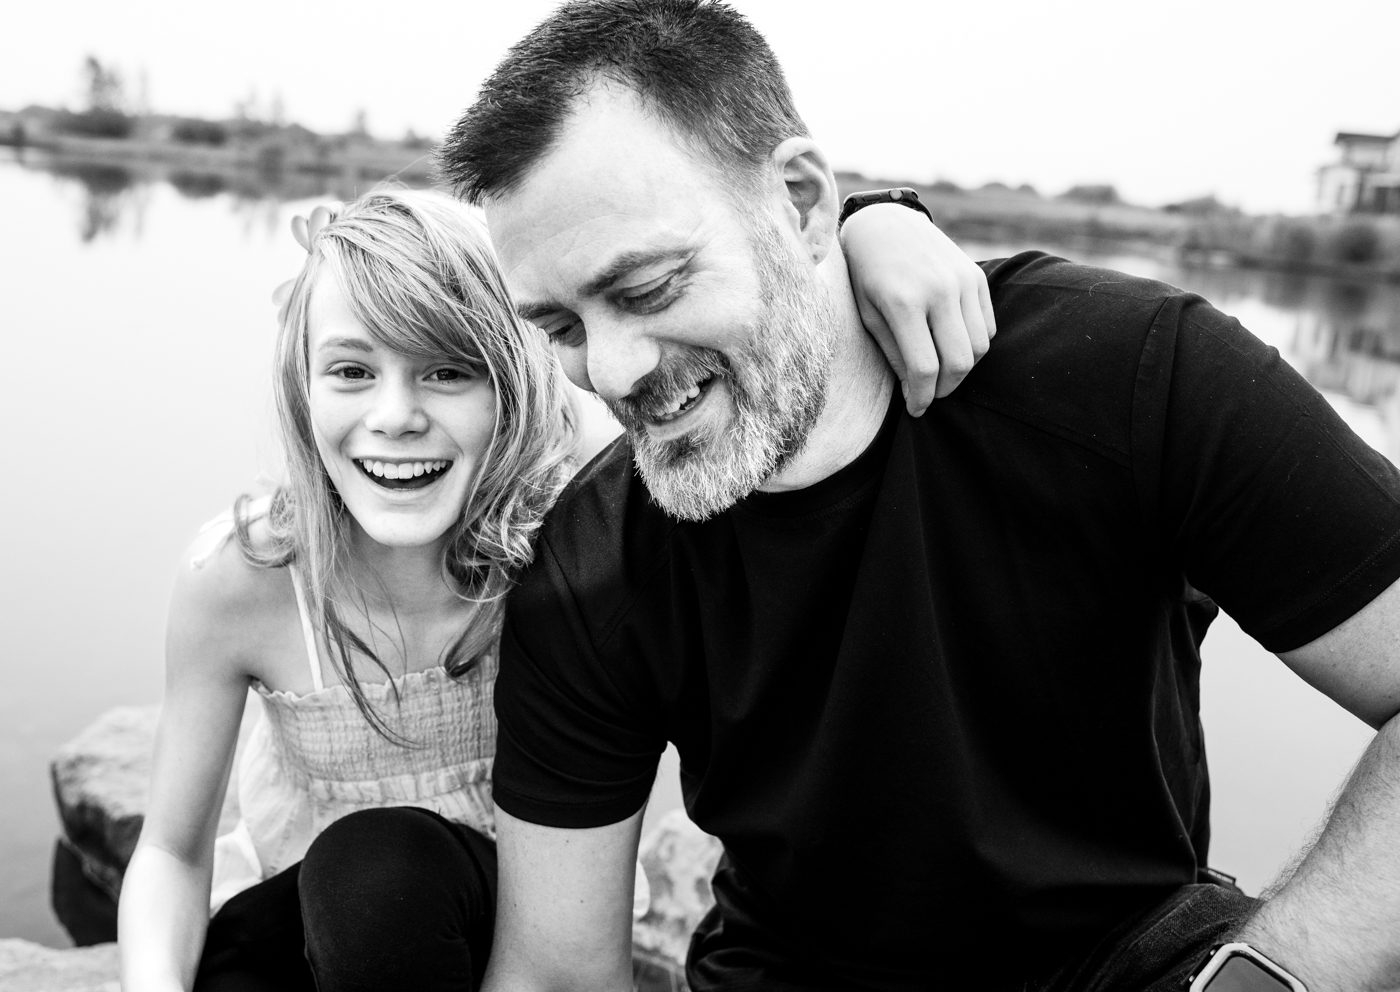 father-candid-laugh-with-young-daughter-portrait